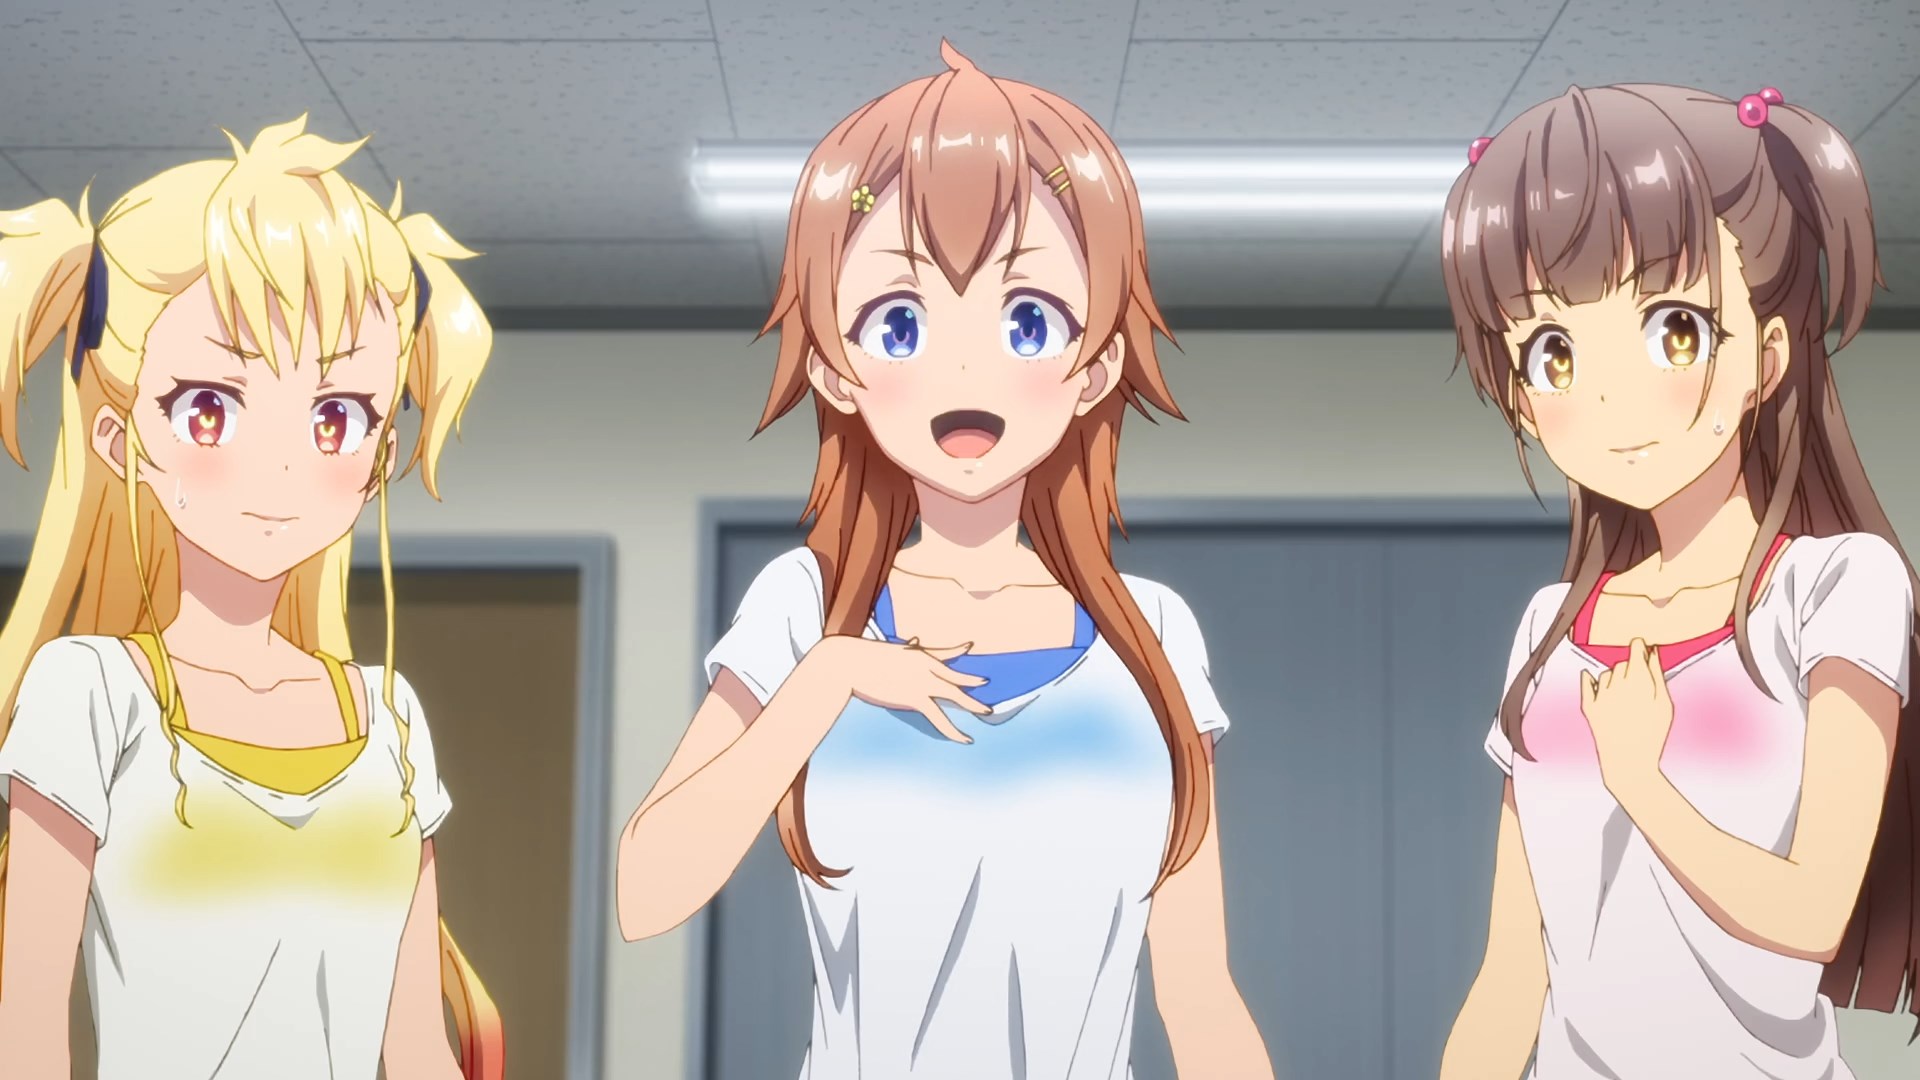 Three idol girls in fitness clothing looking directly at the camera